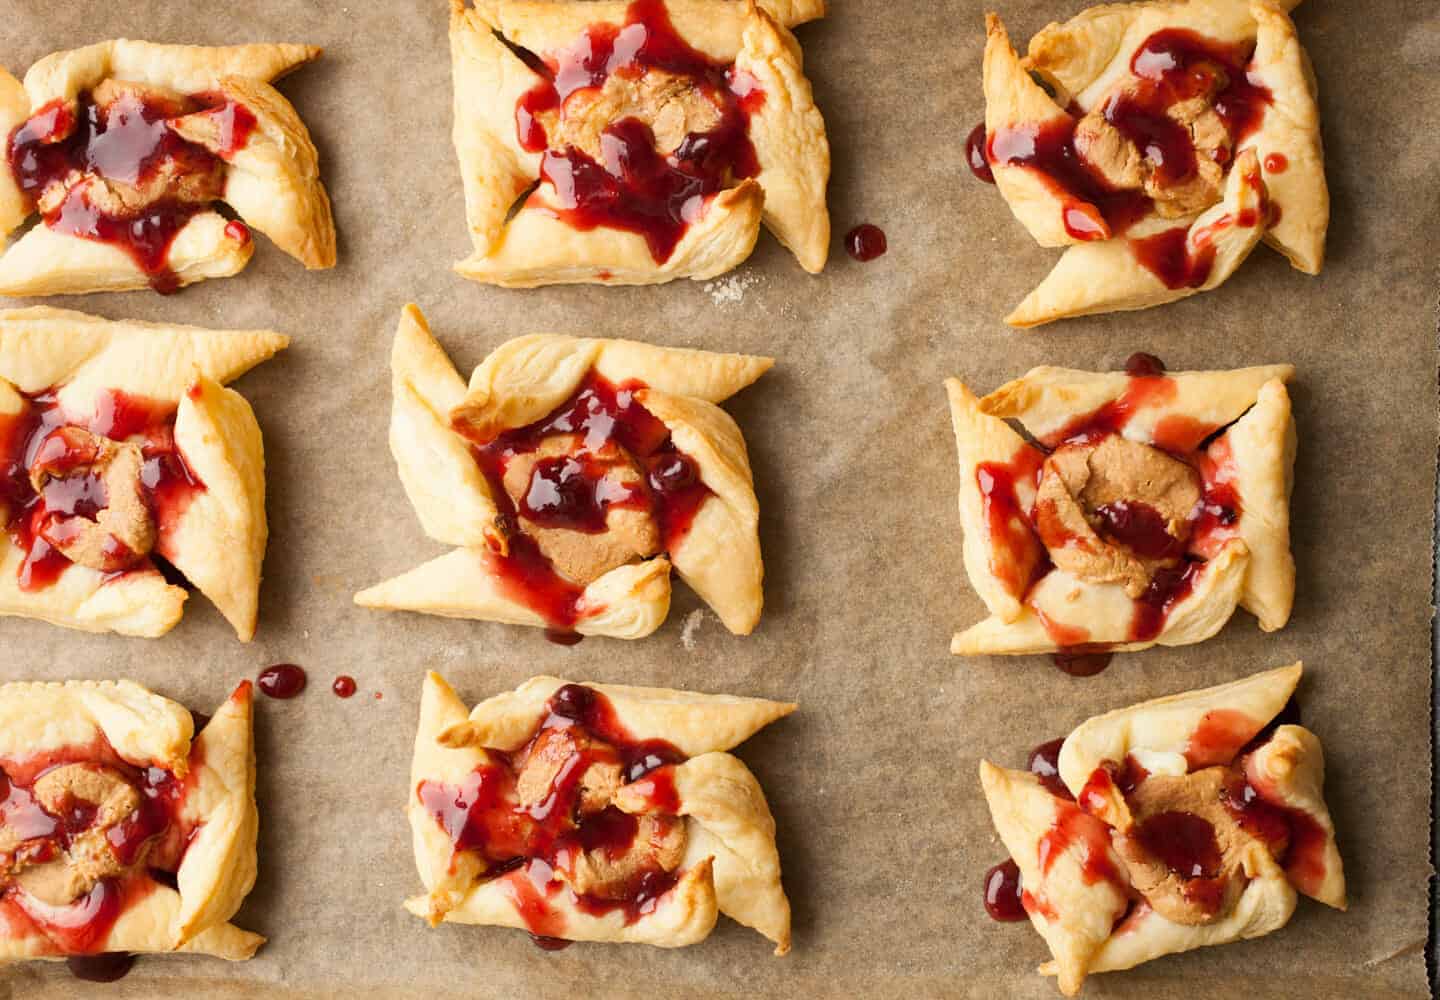 Peanut Butter and Jelly Pinwheels: These easy snacks are so addictive. Great as a breakfast side dish or sweet afternoon treat! Kids love them! | macheesmo.com